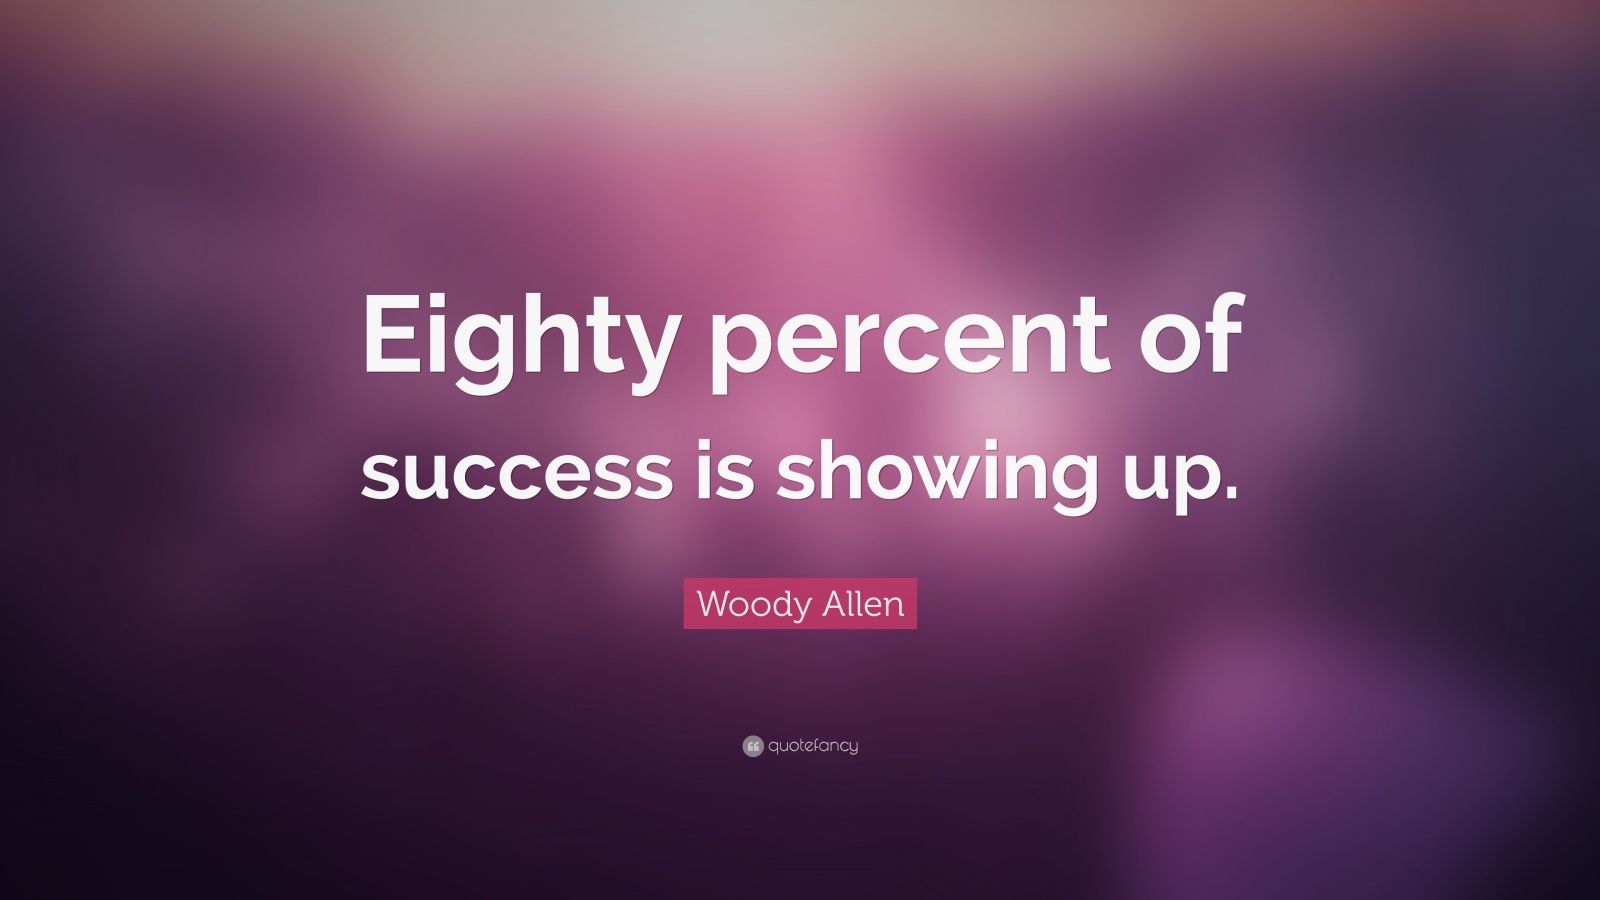 Woody Allen Quote “eighty Percent Of Success Is Showing Up” 23 Wallpapers Quotefancy 5751